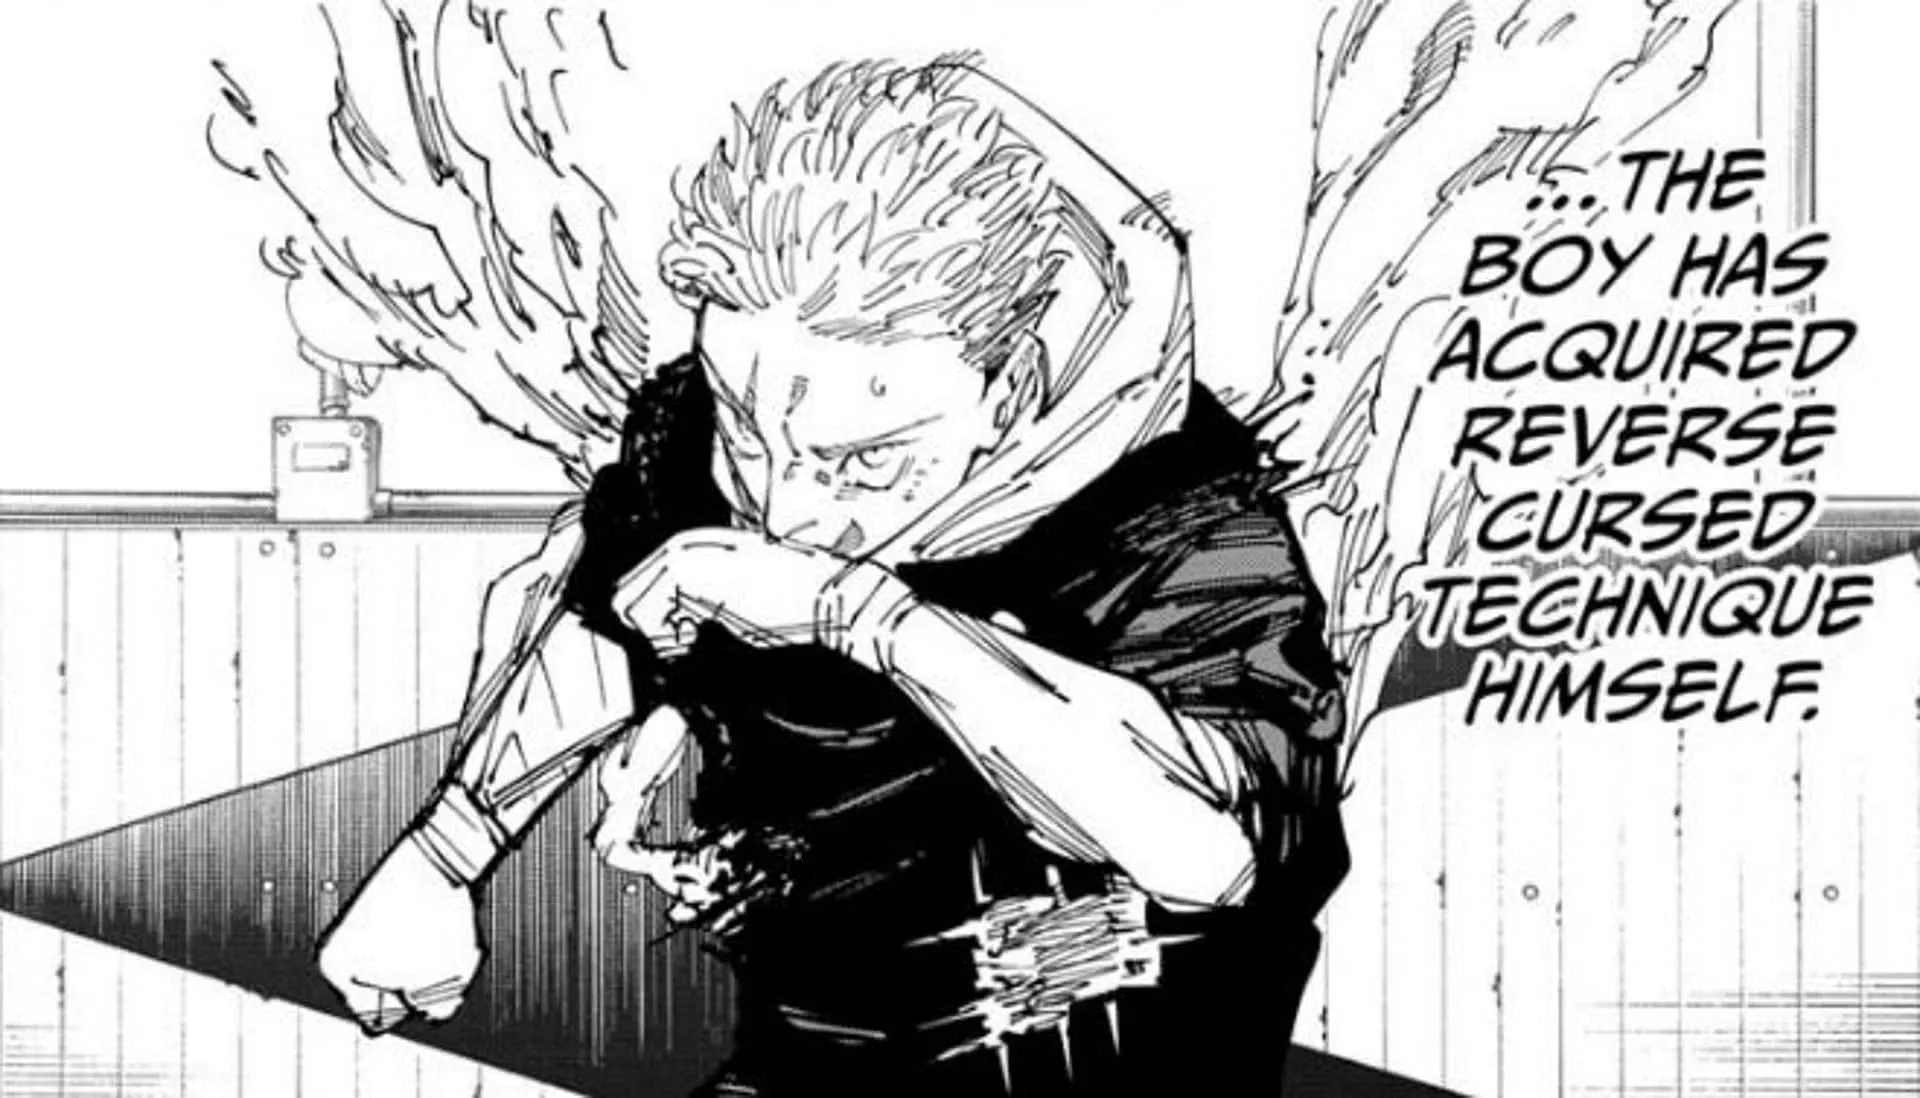 Yuji was revealed to have learned the Reverse Cursed Technique (Image via Gege Akutami, Shueisha)